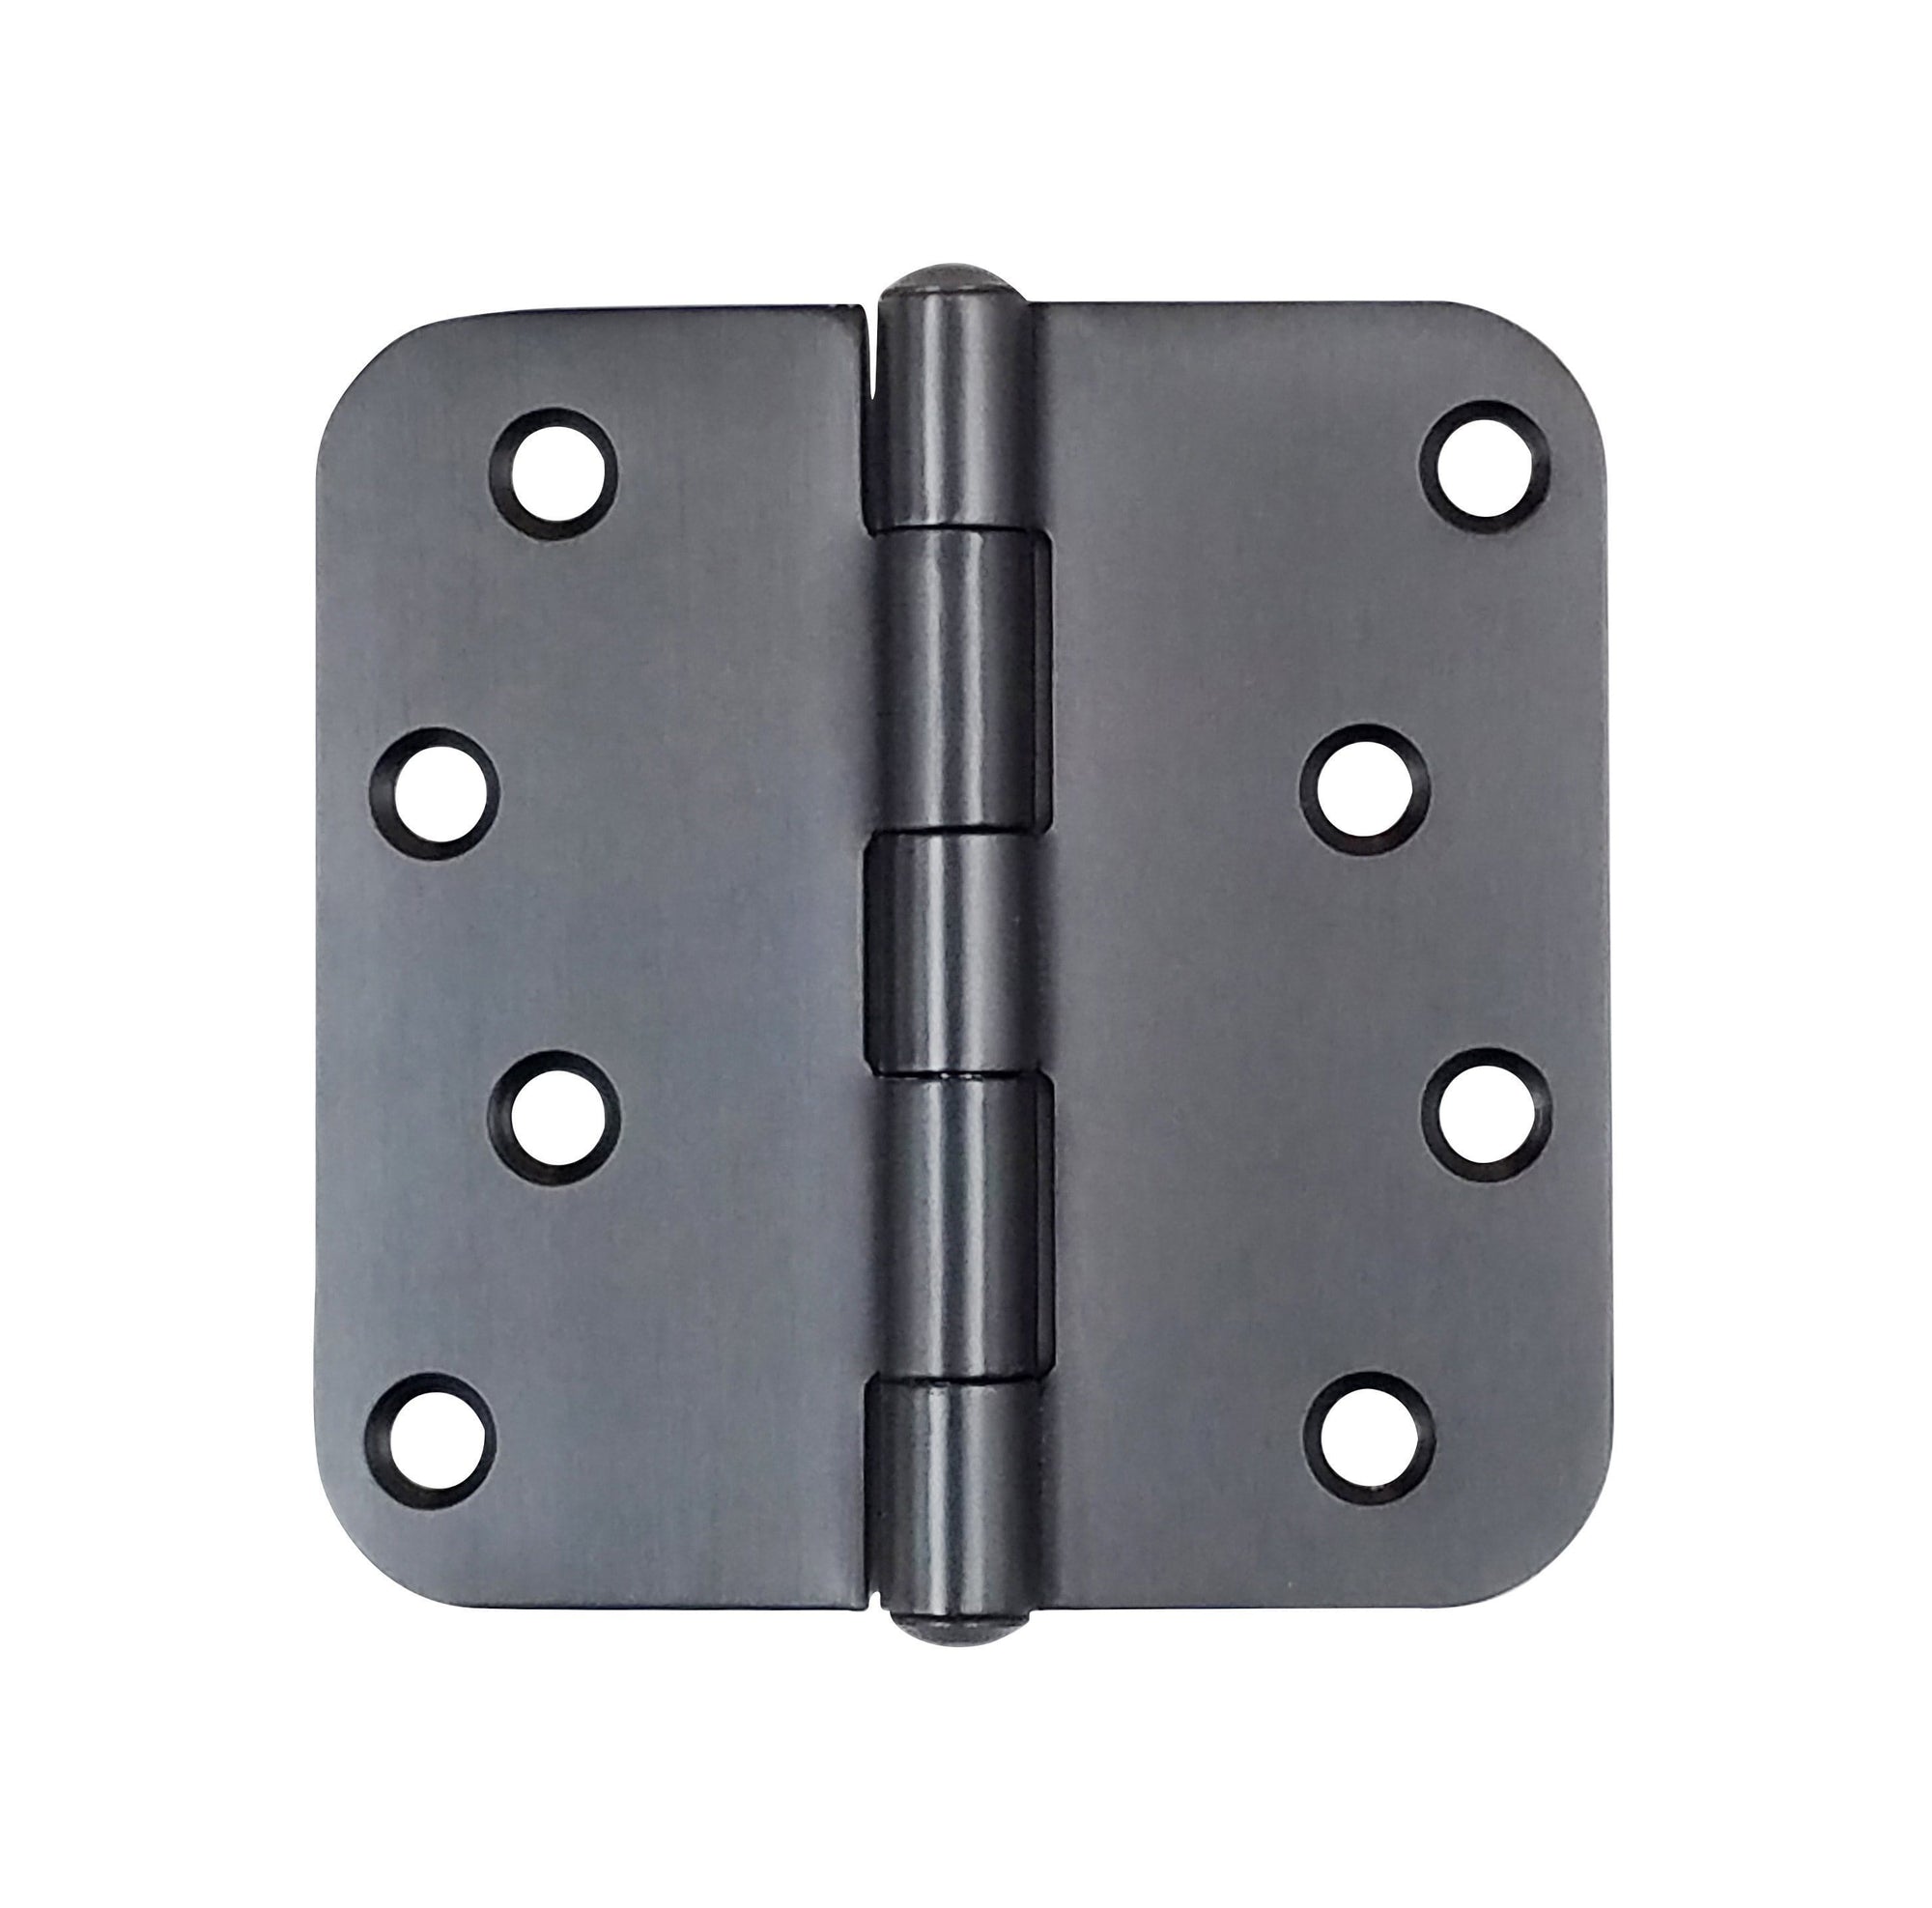 Clearance Oil Rubbed Bronze Stainless Steel Hinges Residential Hinges - 4" Inch With 5/8" Inch Radius - Highly Rust Resistant - 3 Pack